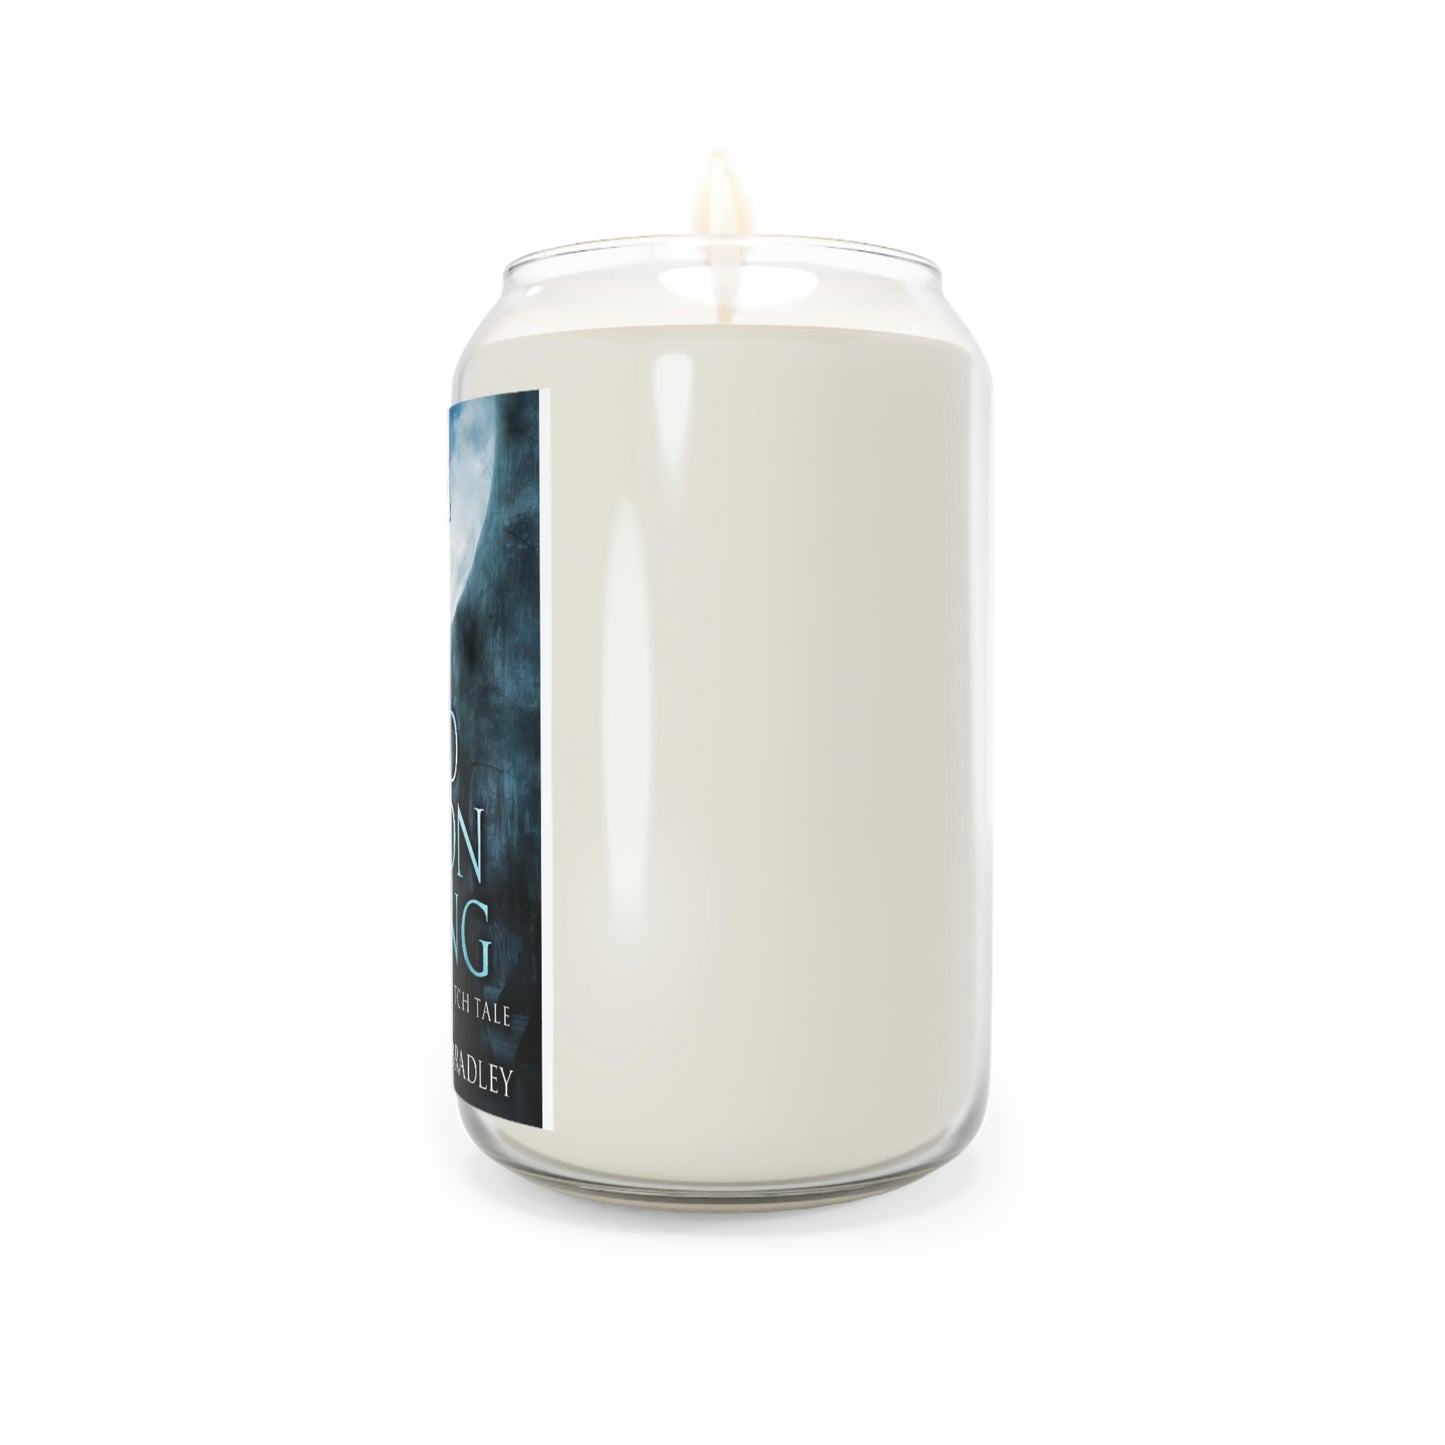 Bad Moon Rising - Scented Candle